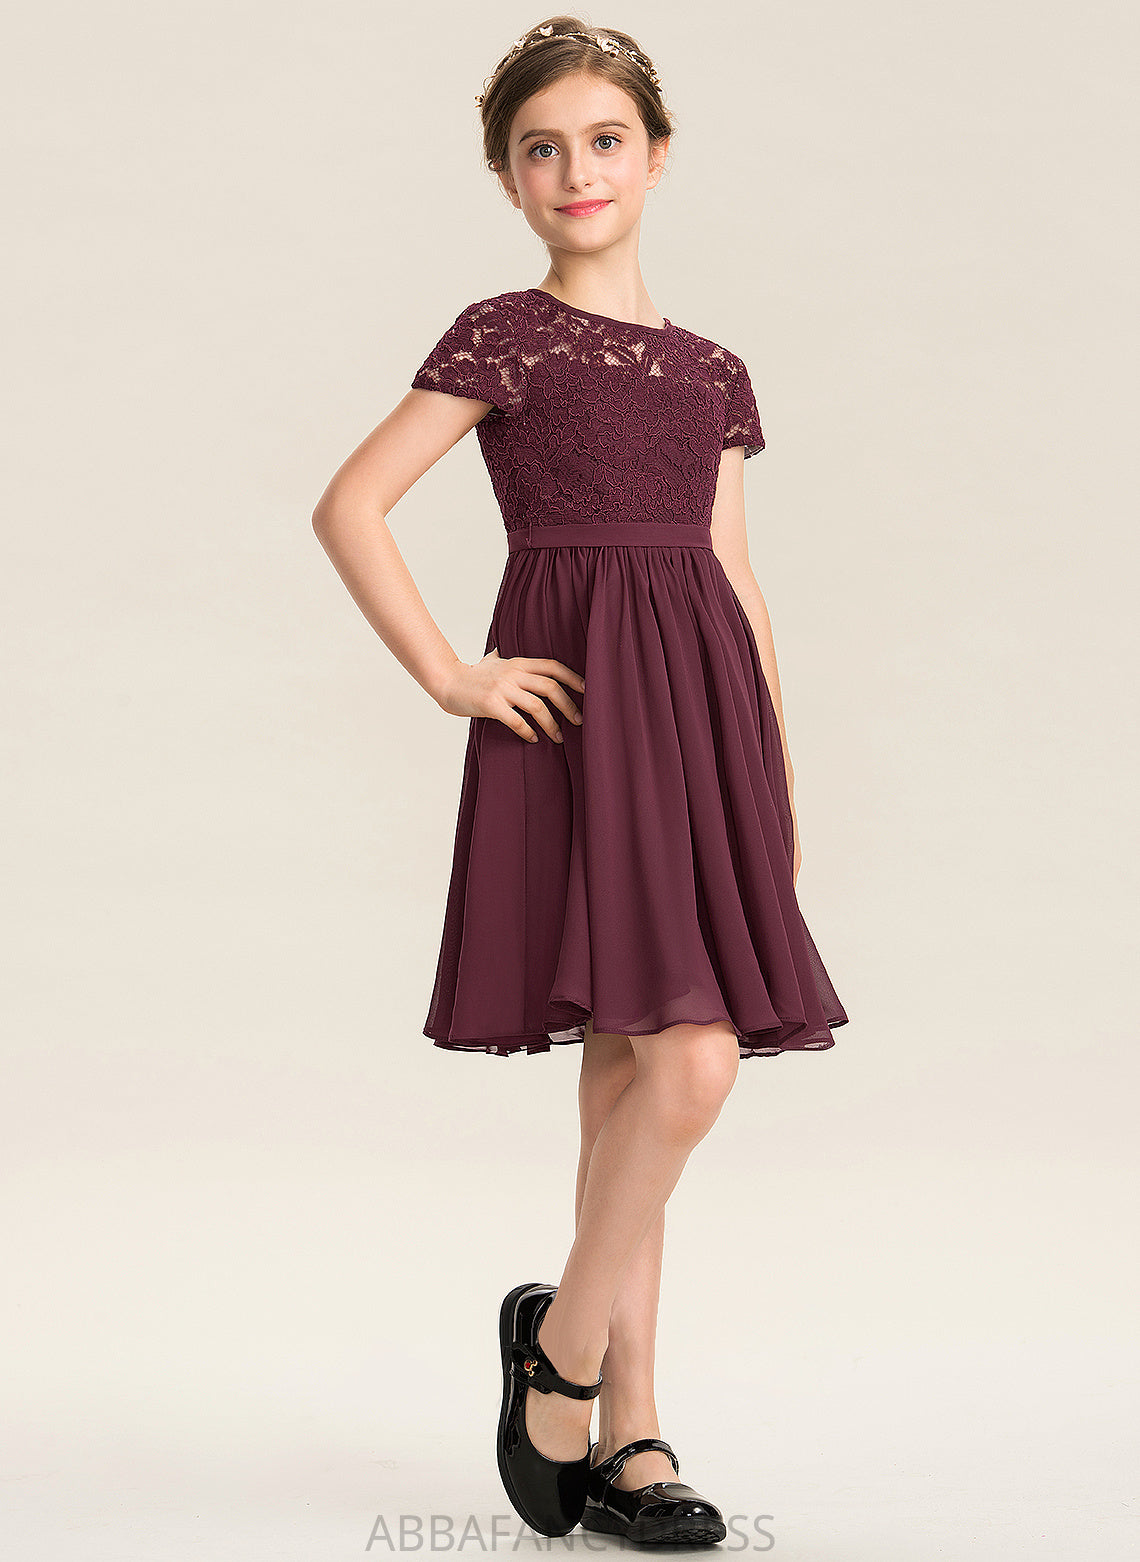 With Junior Bridesmaid Dresses Neck Chiffon Scoop Lace A-Line Knee-Length Bow(s) Nola